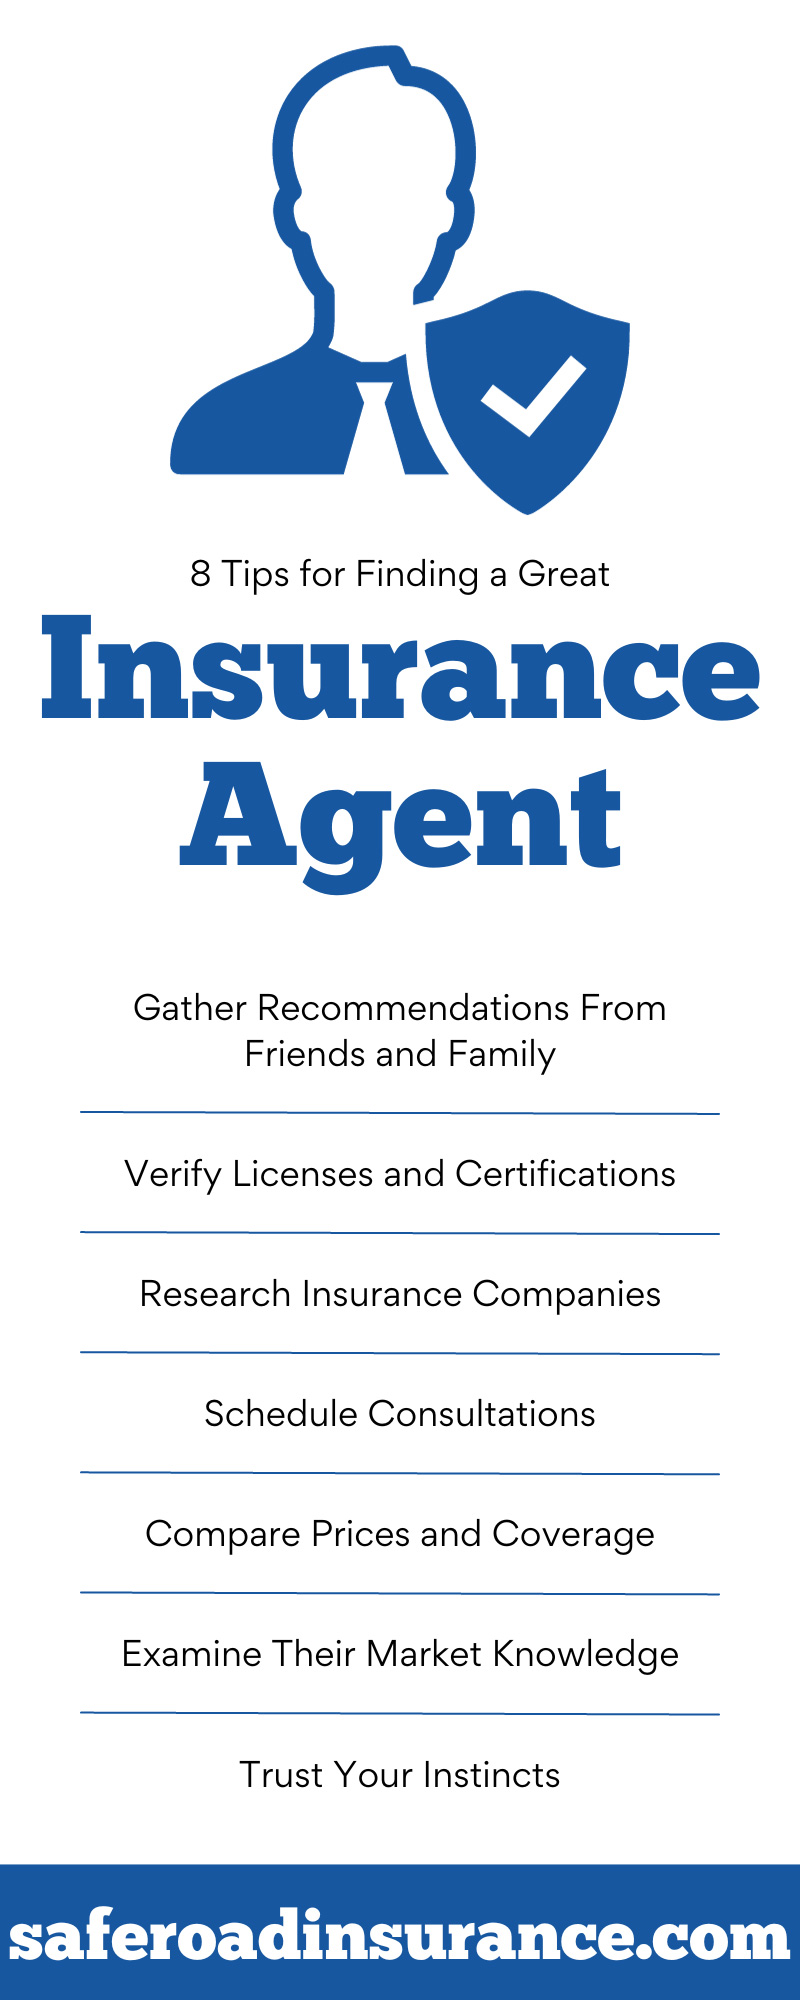 8 Tips for Finding a Great Insurance Agent